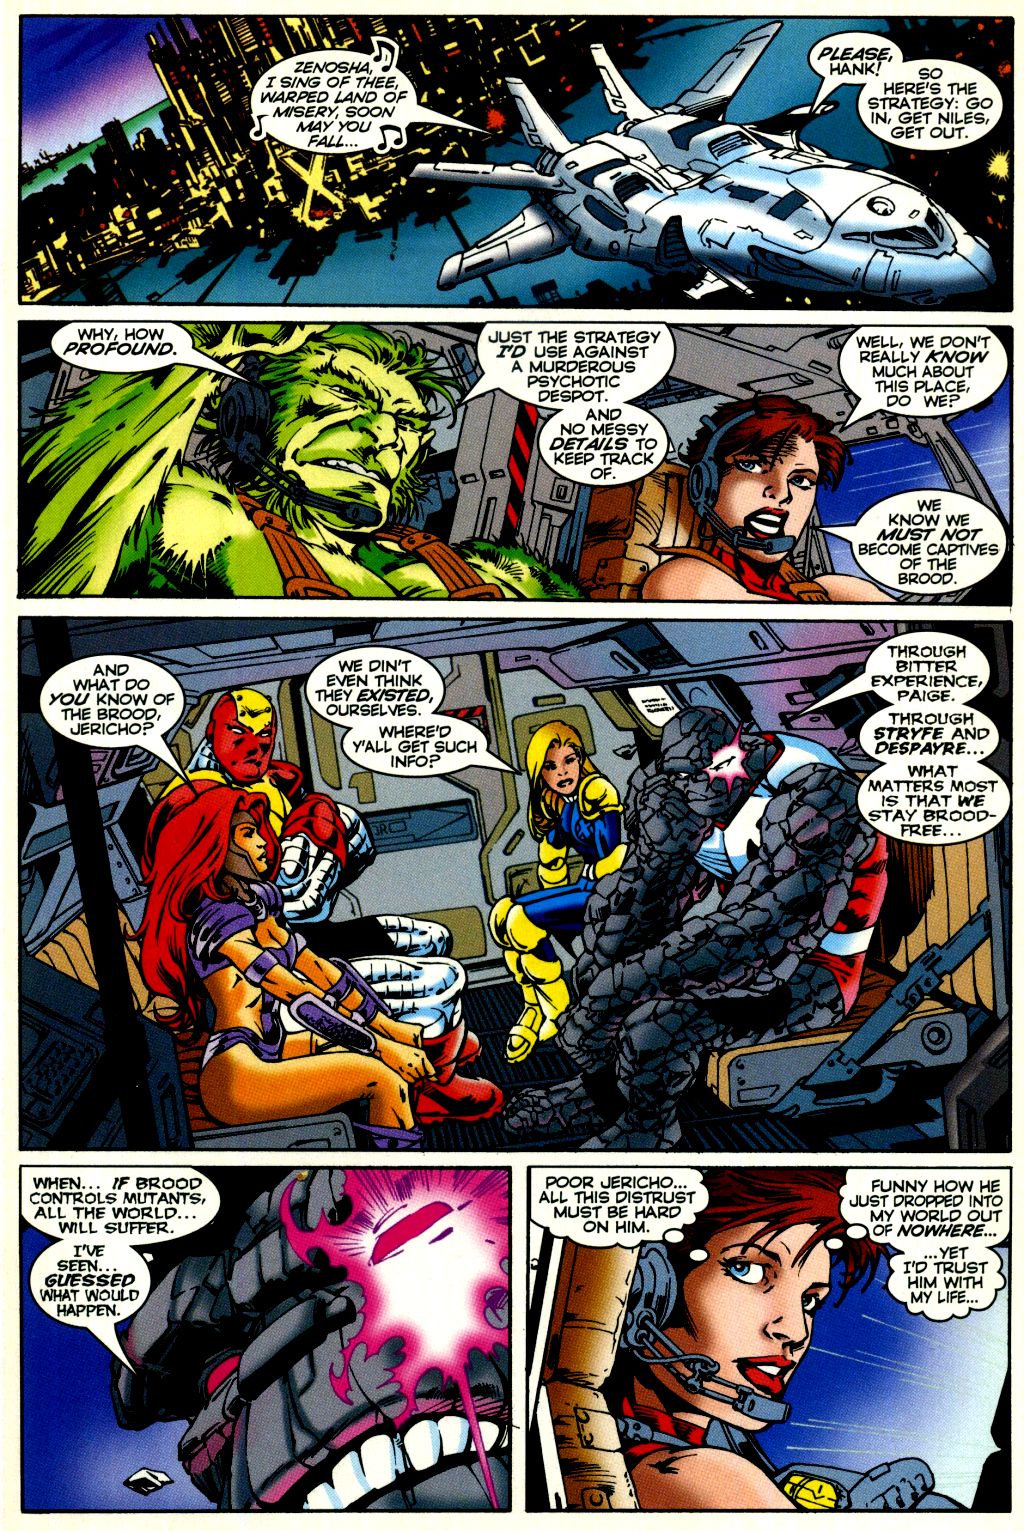 Read online Exciting X-Patrol comic -  Issue # Full - 8